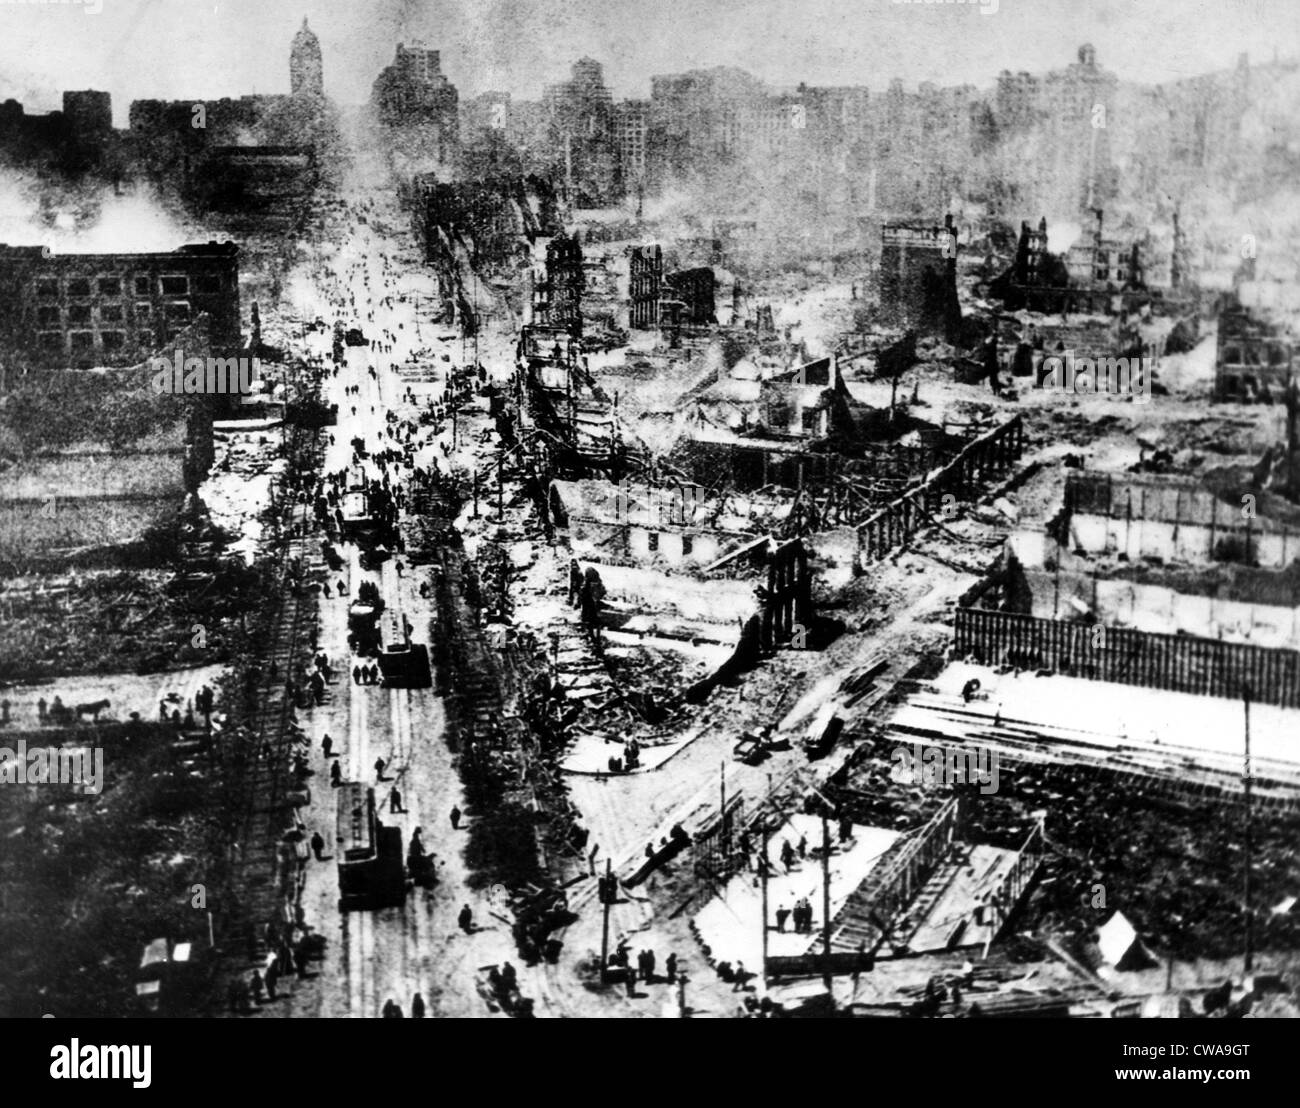 San Francisco, Aftermath of Earthquake and fire, Looking up Market Street at the smouldering city from the Ferry Building, Stock Photo